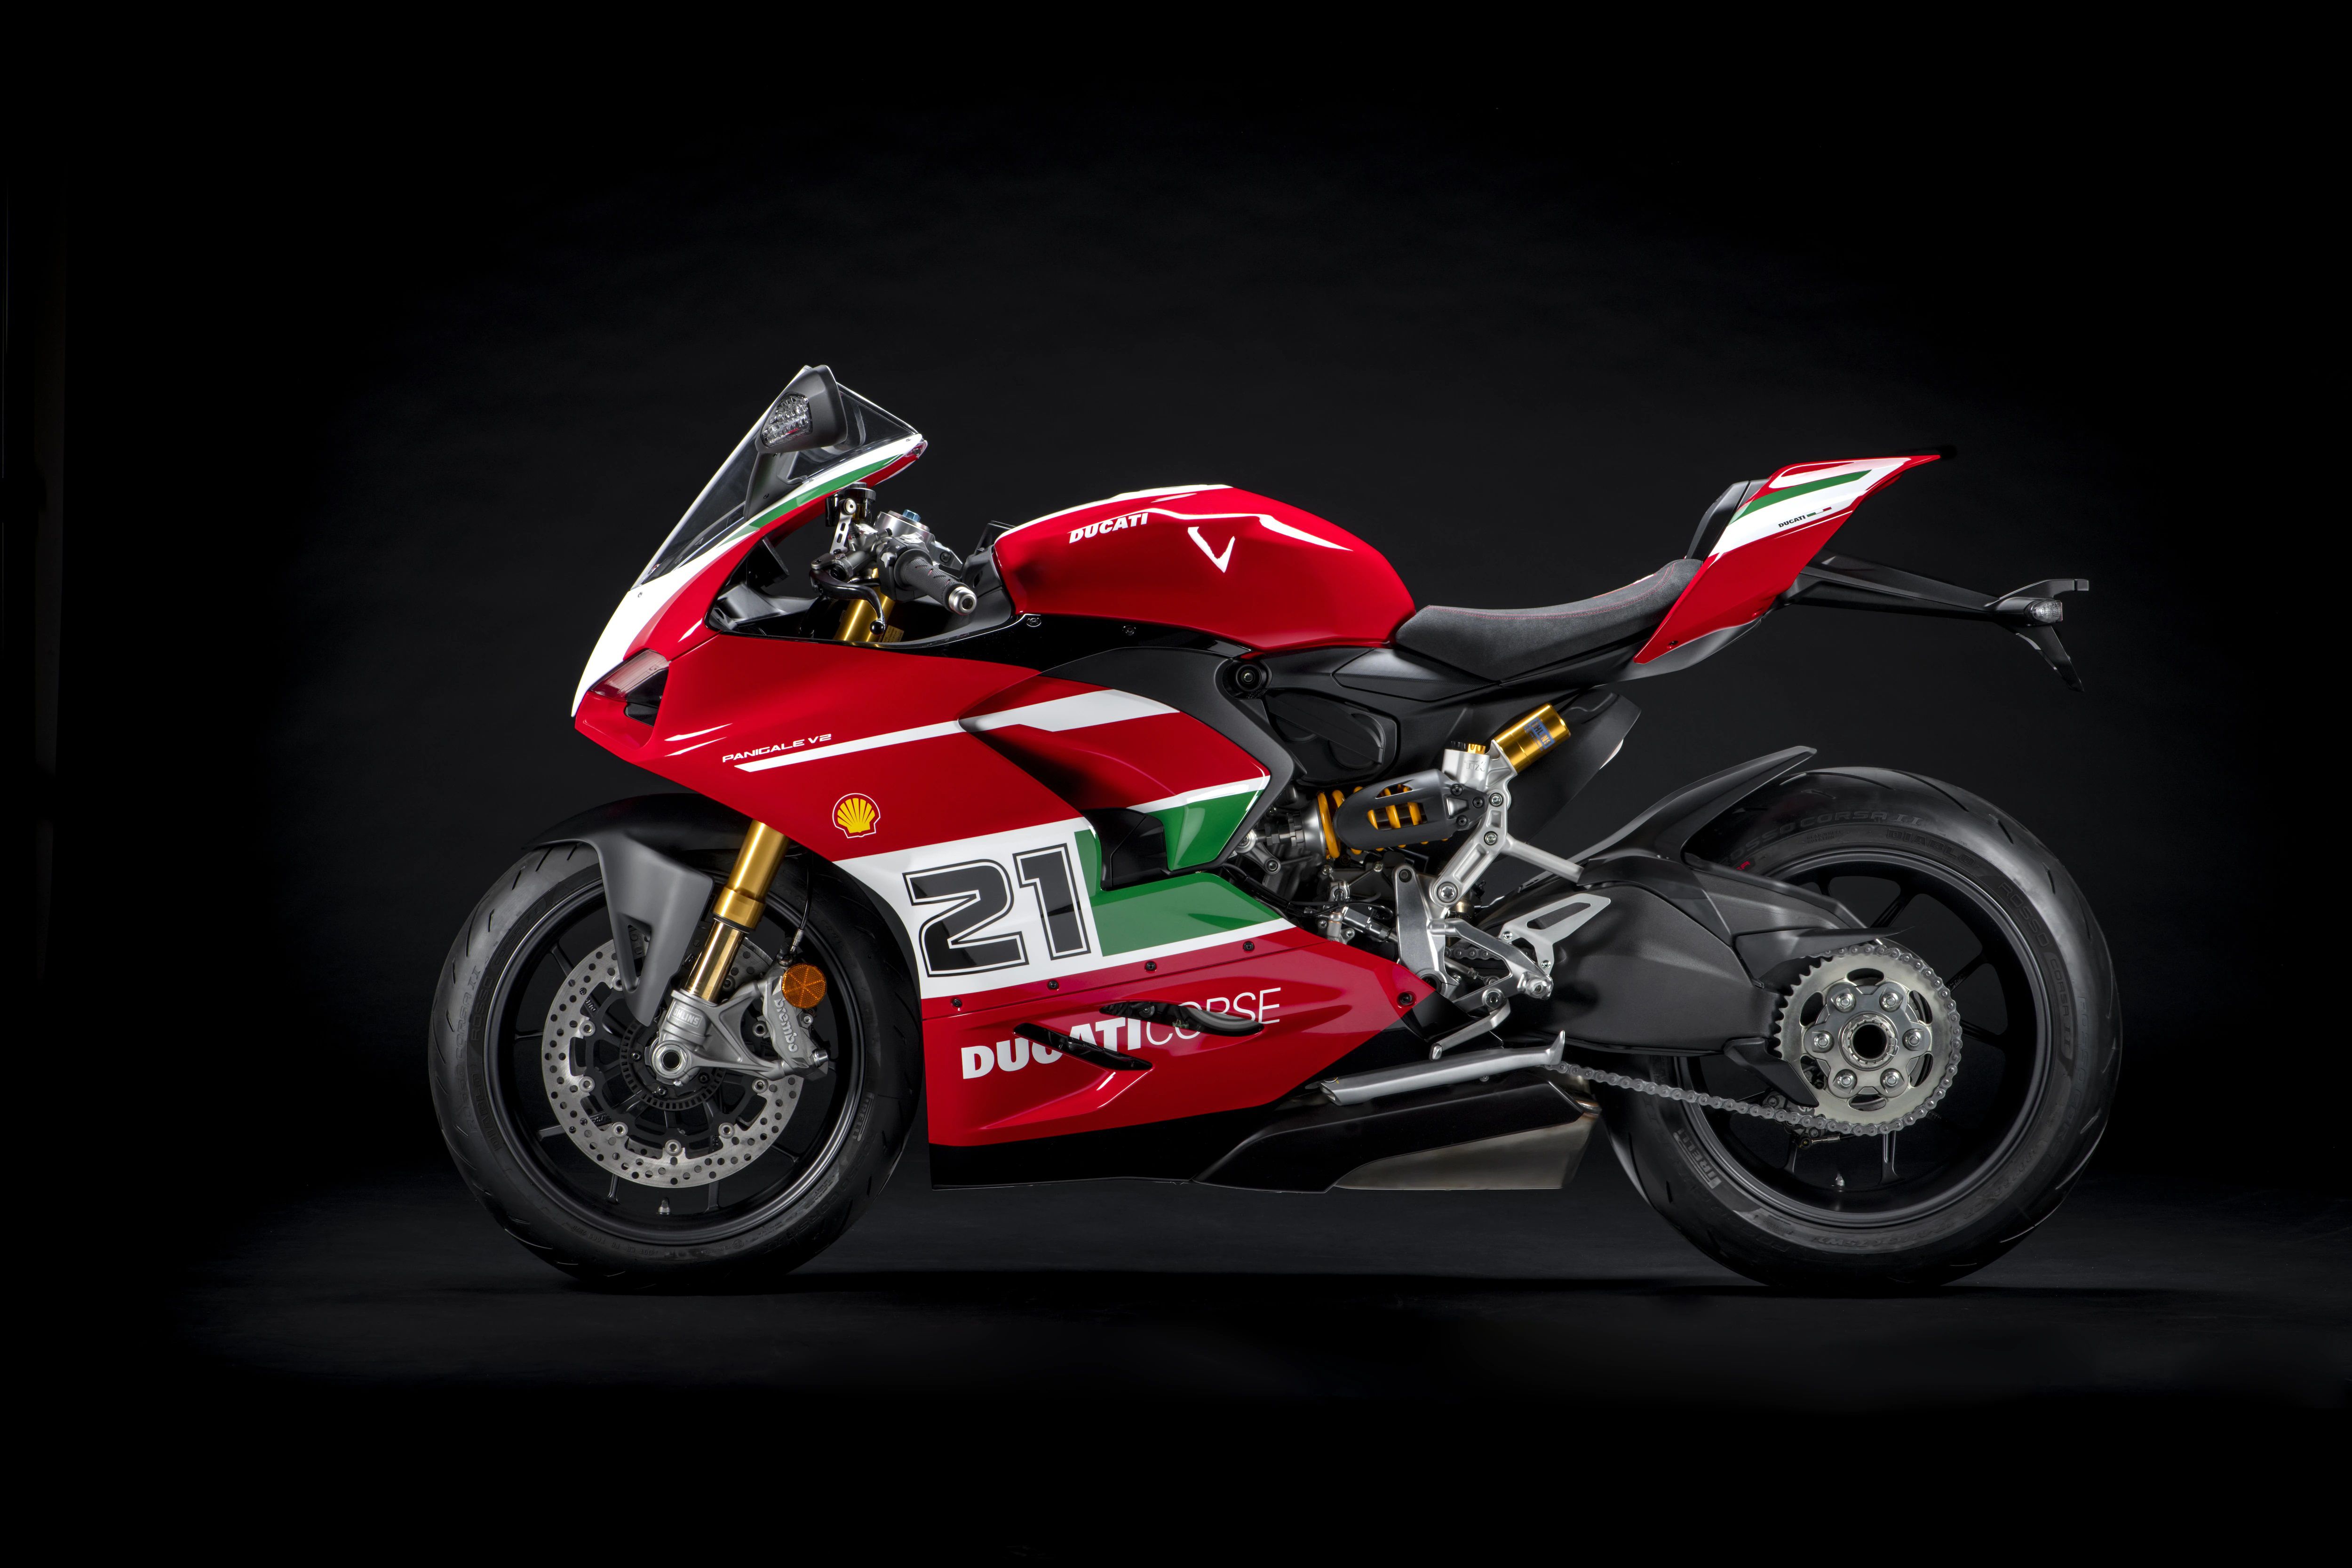 Panigale V2 Bayliss has upgraded components and less weight. Ducati photo